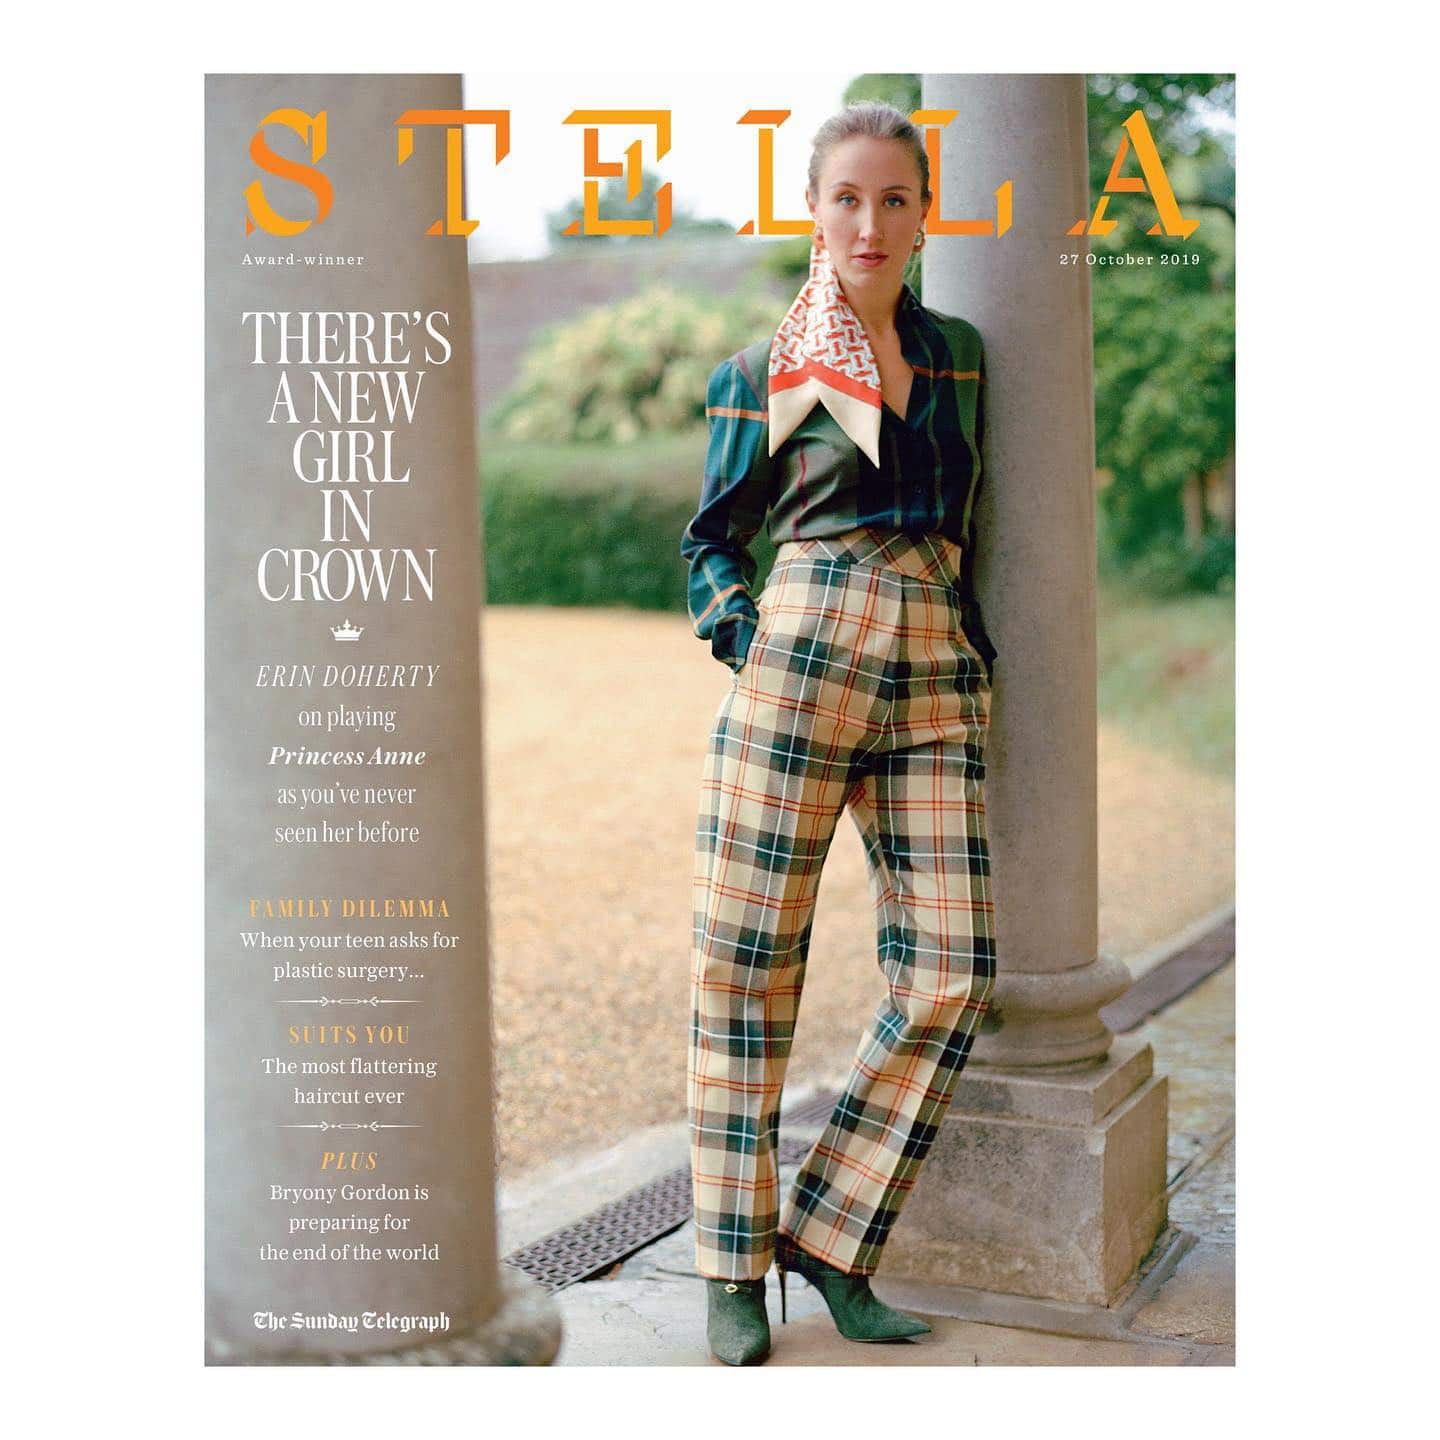 @erinrdoherty graced the cover of this weekend’s @telegraphstella Magazine discussing her roles as Princess Anne in S3 of @thecrownnetflix  .
.
.
📸: @christopher.fenner : @tonastell 🏻‍♀️: @fabionogueira : @kennethsohmakeup .
.
.
.
@netflixuk @netflix